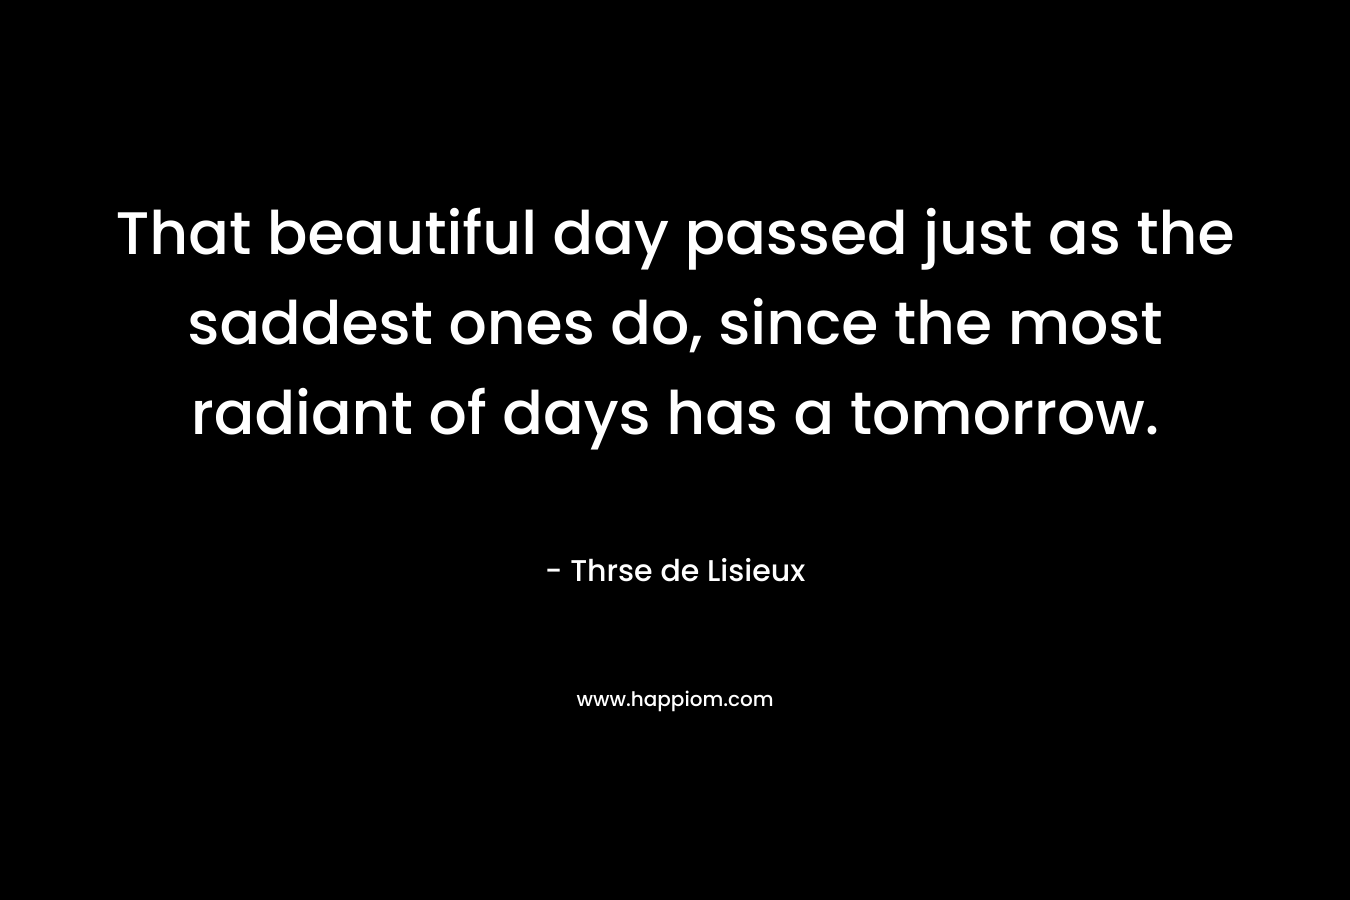 That beautiful day passed just as the saddest ones do, since the most radiant of days has a tomorrow. – Thrse de Lisieux